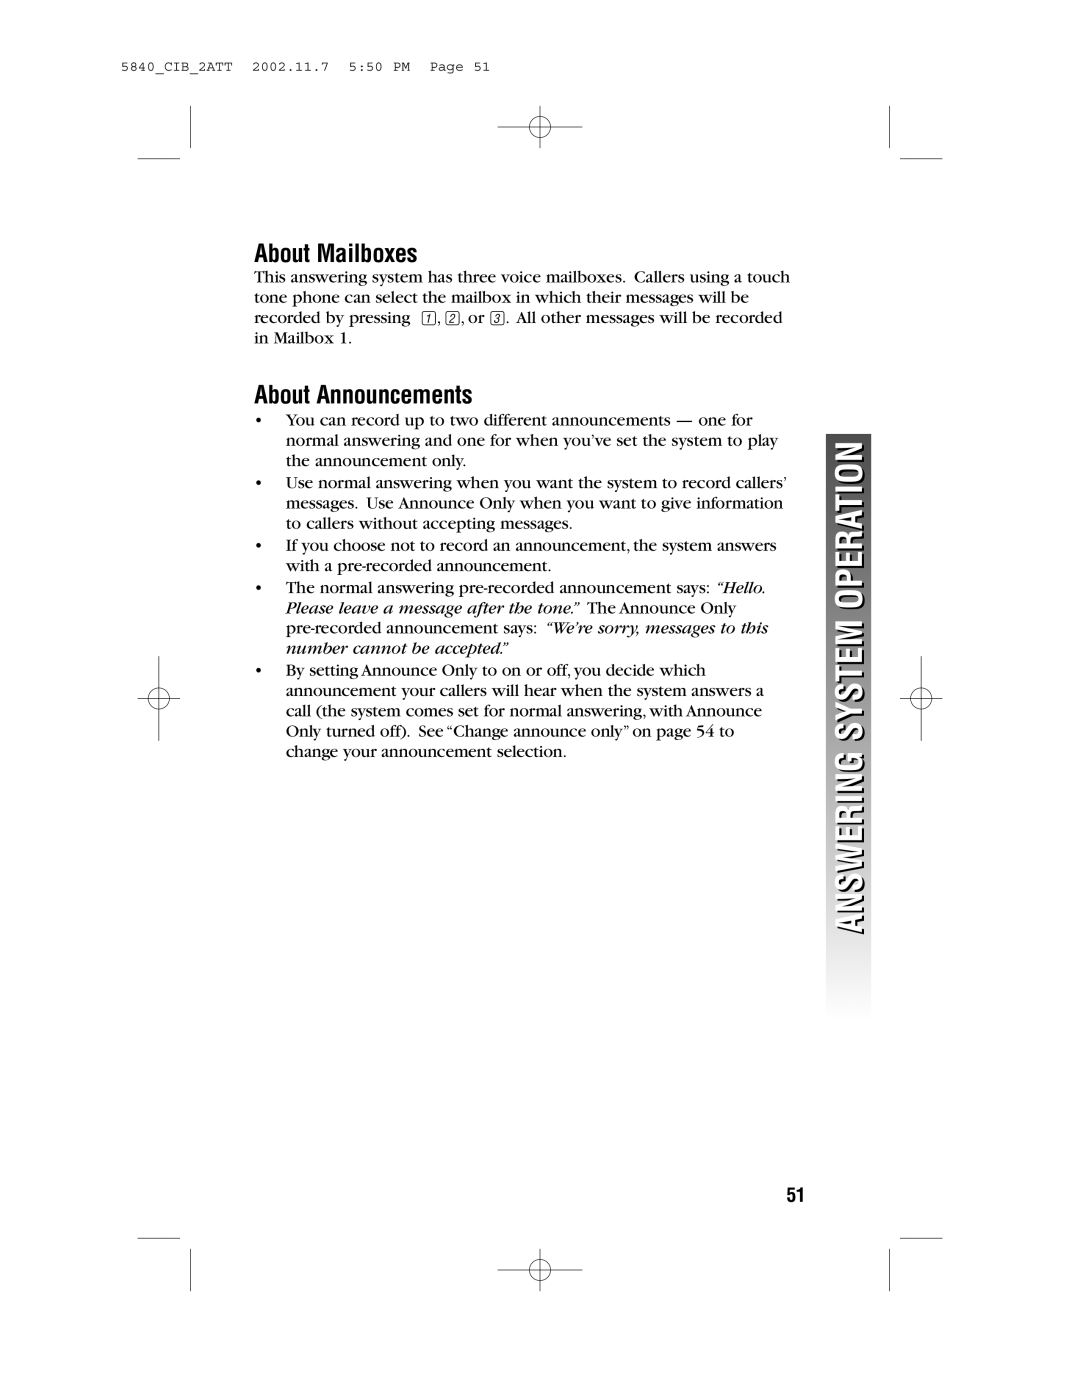 AT&T 5840 user manual About Mailboxes, About Announcements, Answering System Operation 